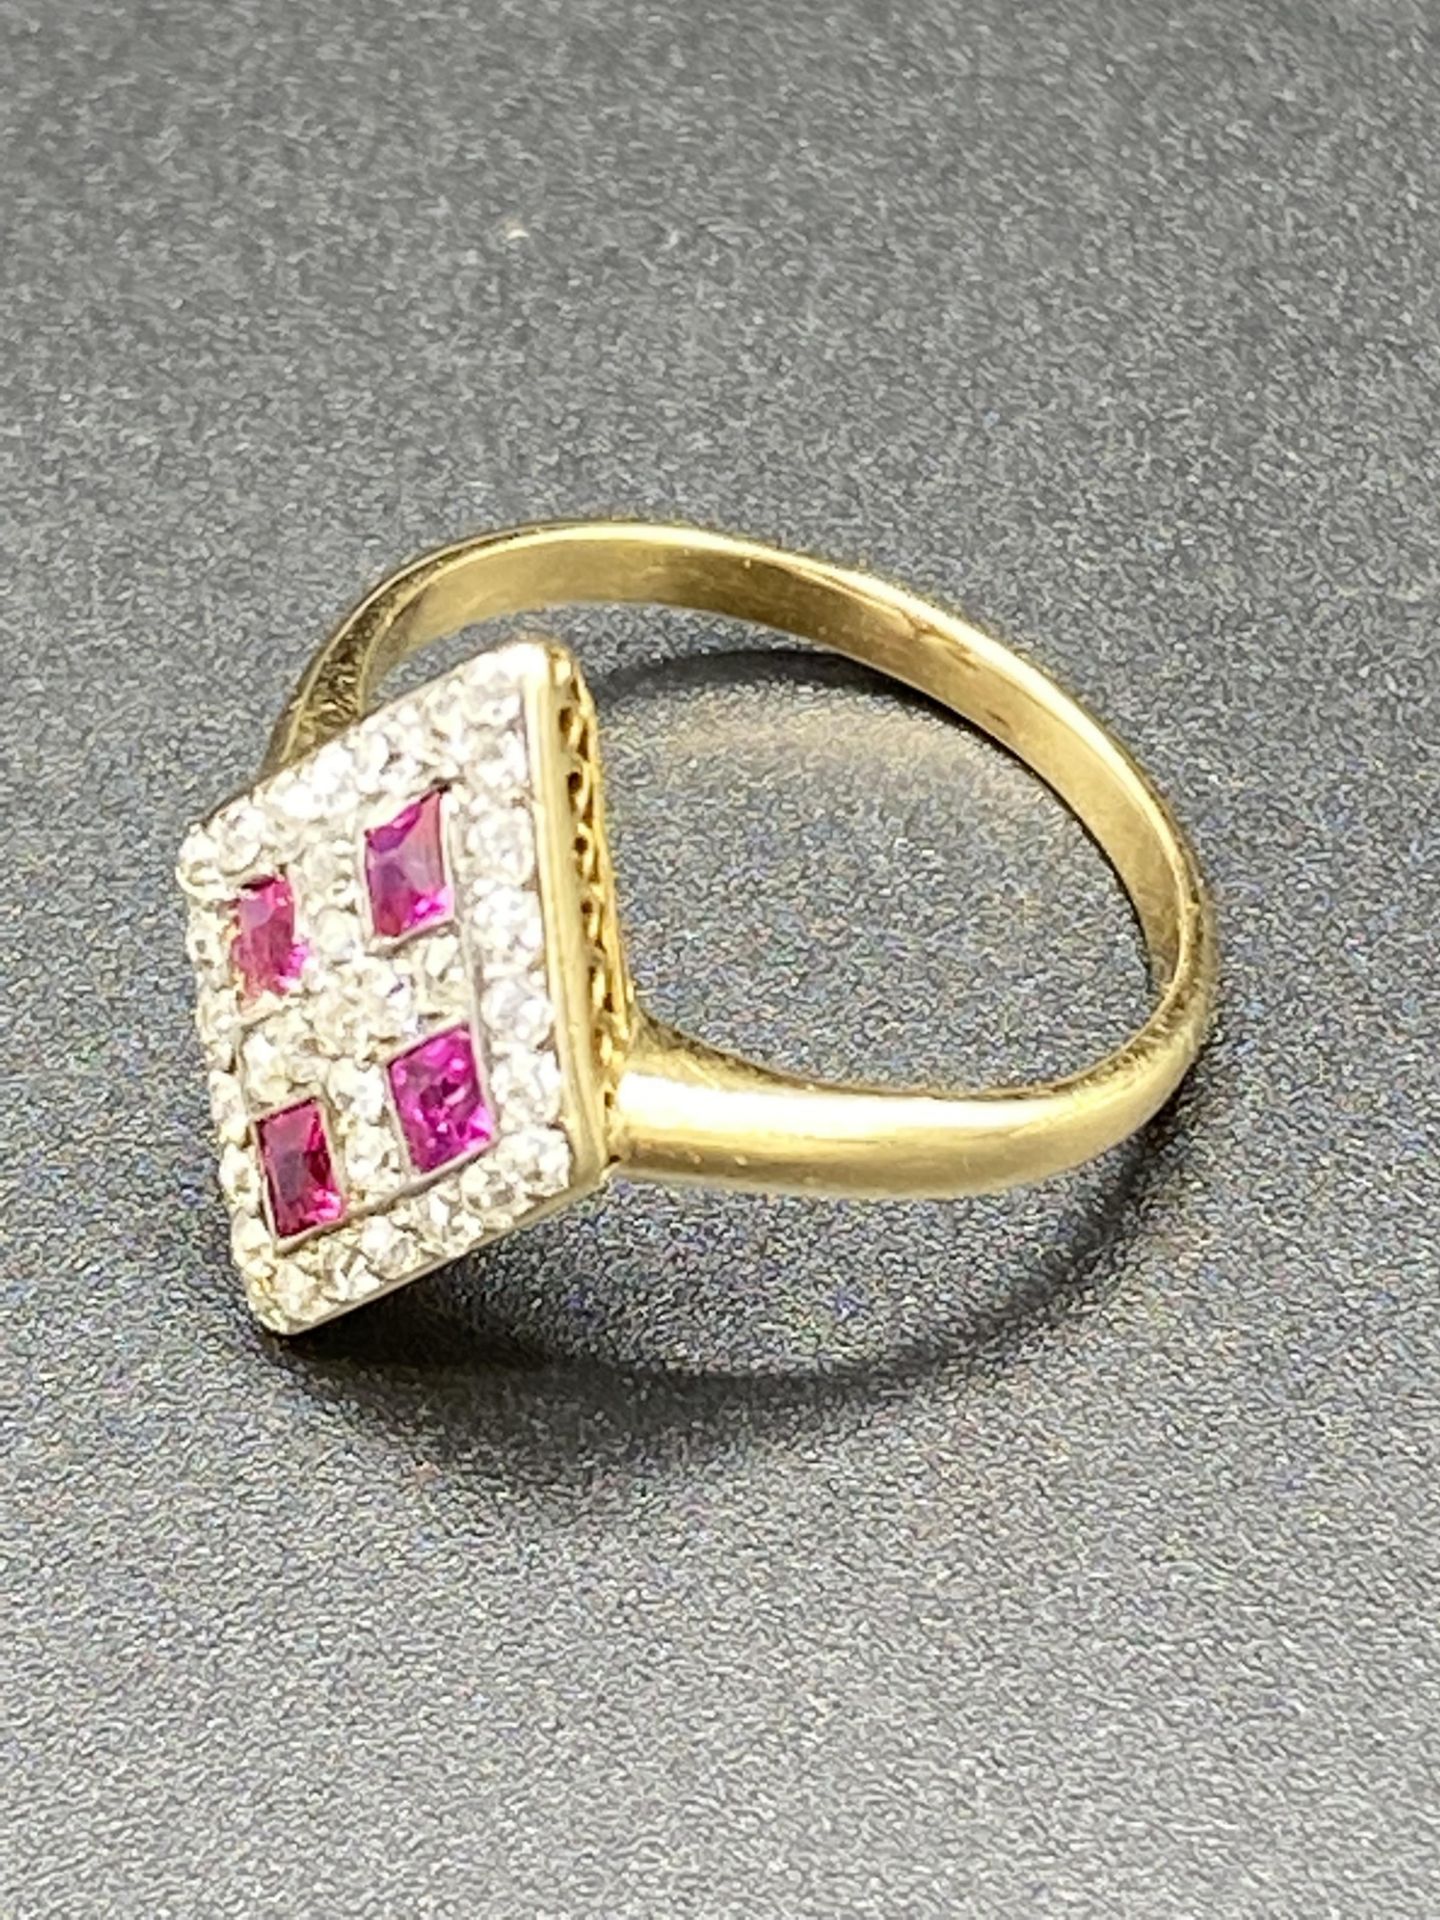 Gold, ruby and diamond ring - Image 3 of 6